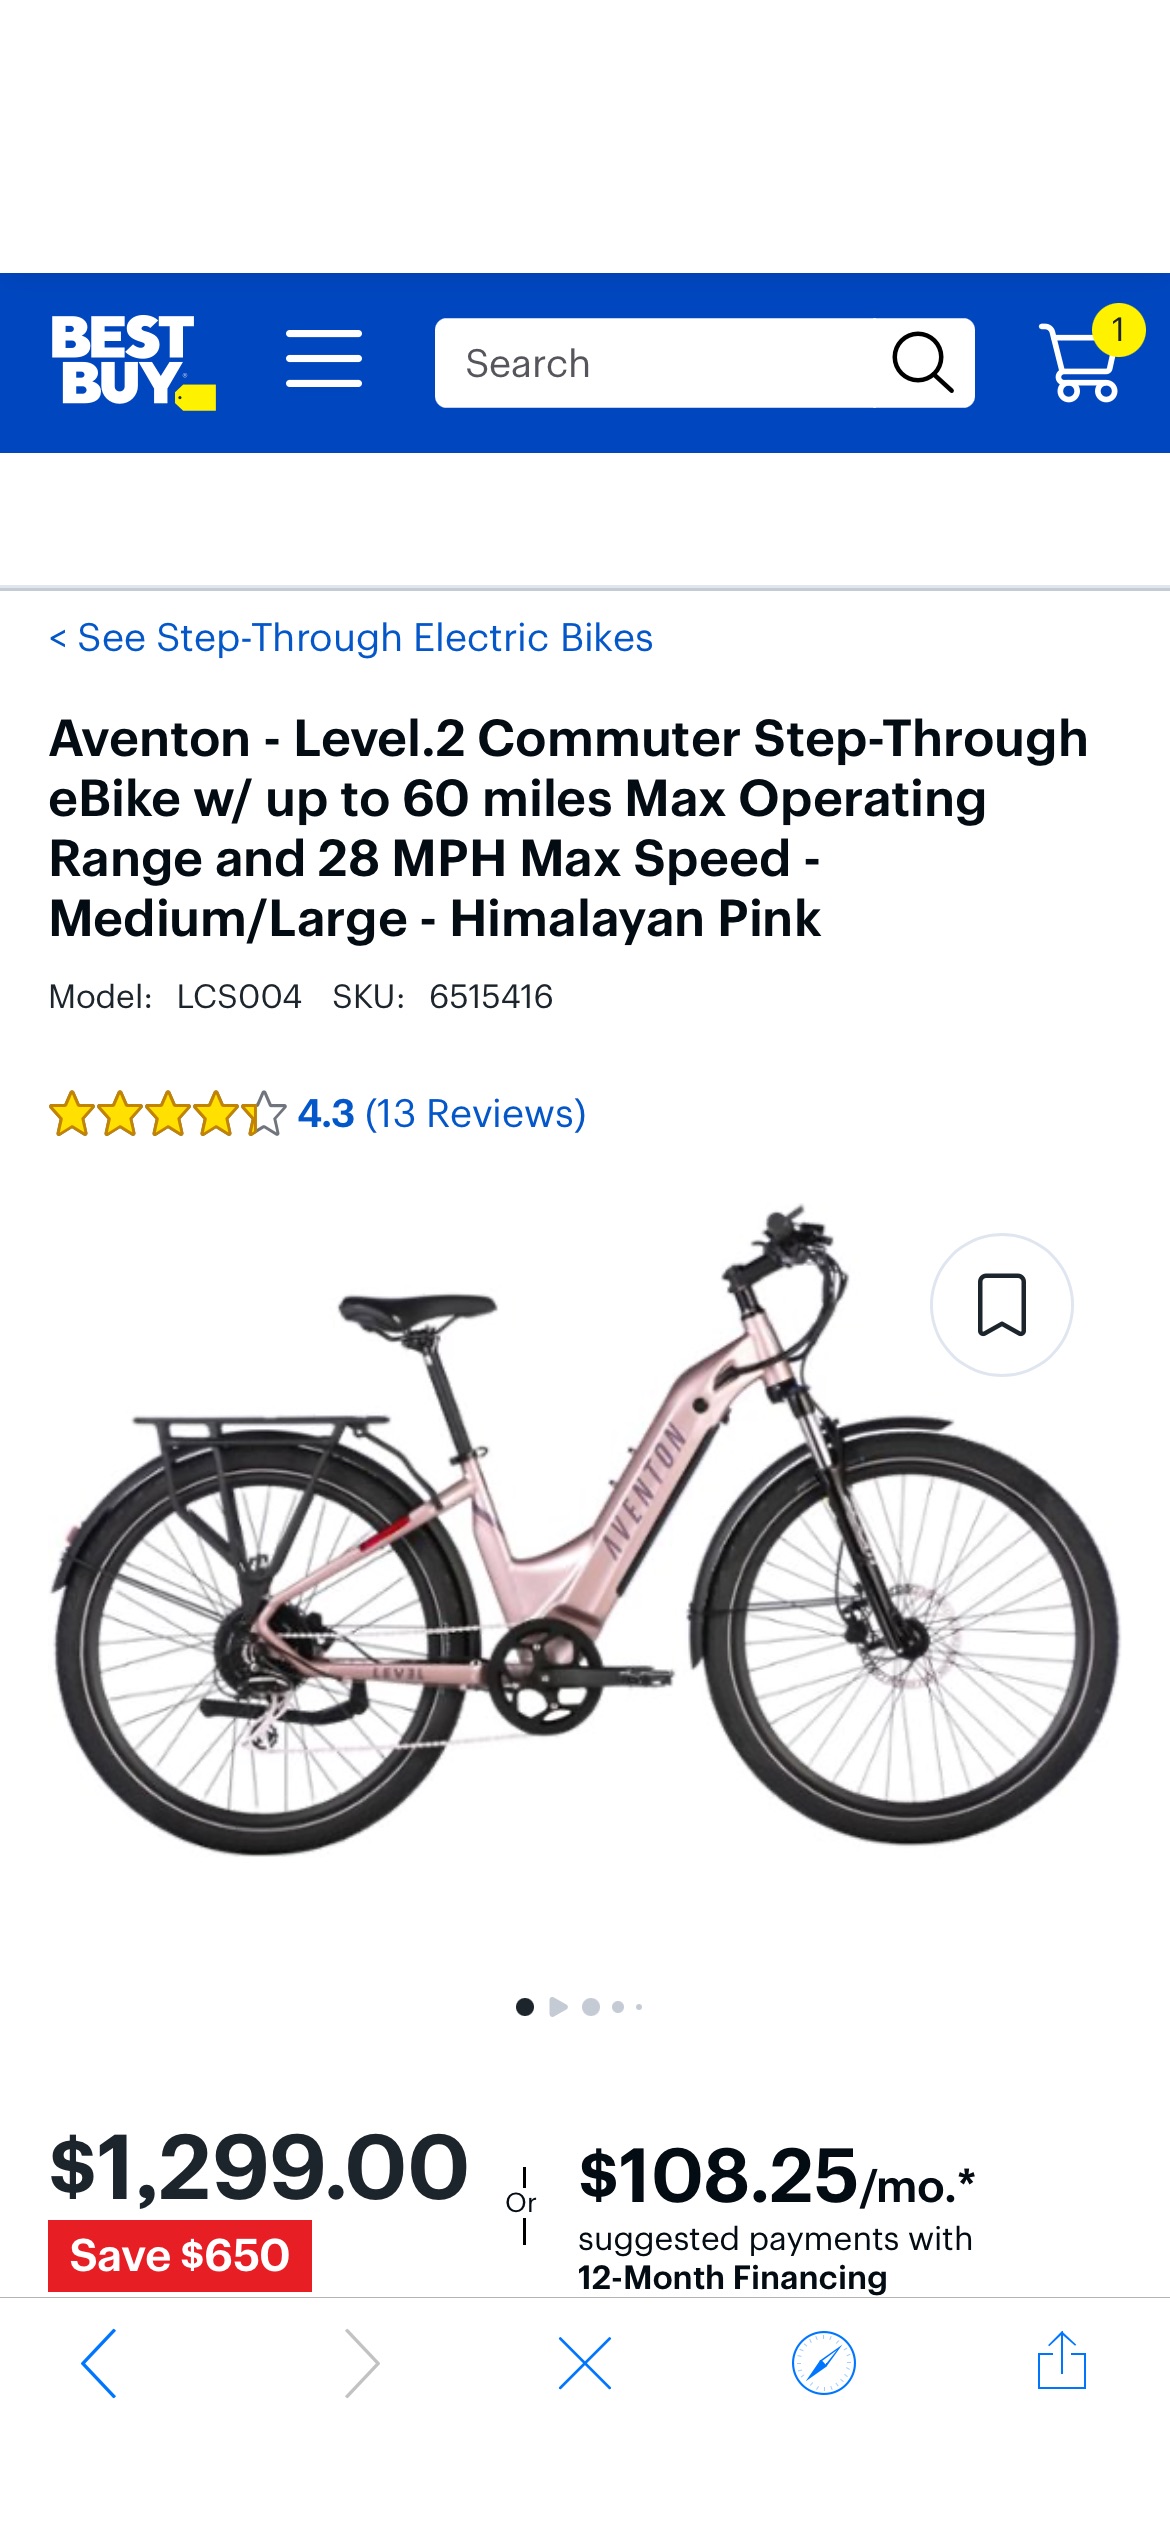 Aventon Level.2 Commuter Step-Through eBike w/ up to 60 miles Max Operating Range and 28 MPH Max Speed Medium/Large Himalayan Pink LCS004 - Best Buy